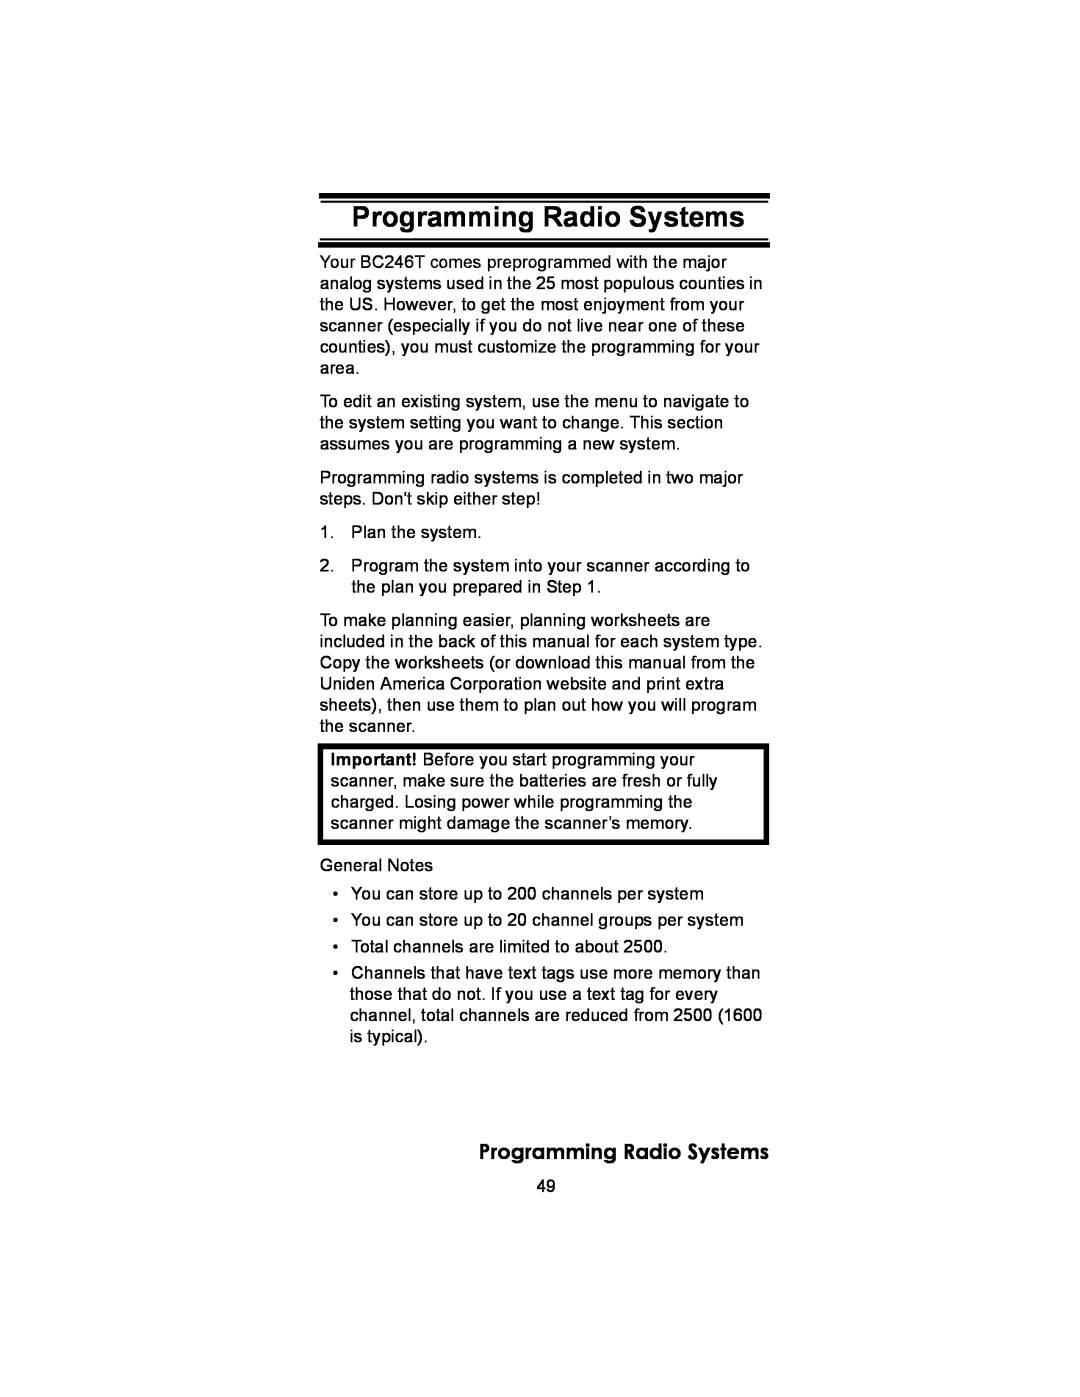 Uniden BC246T owner manual Programming Radio Systems 